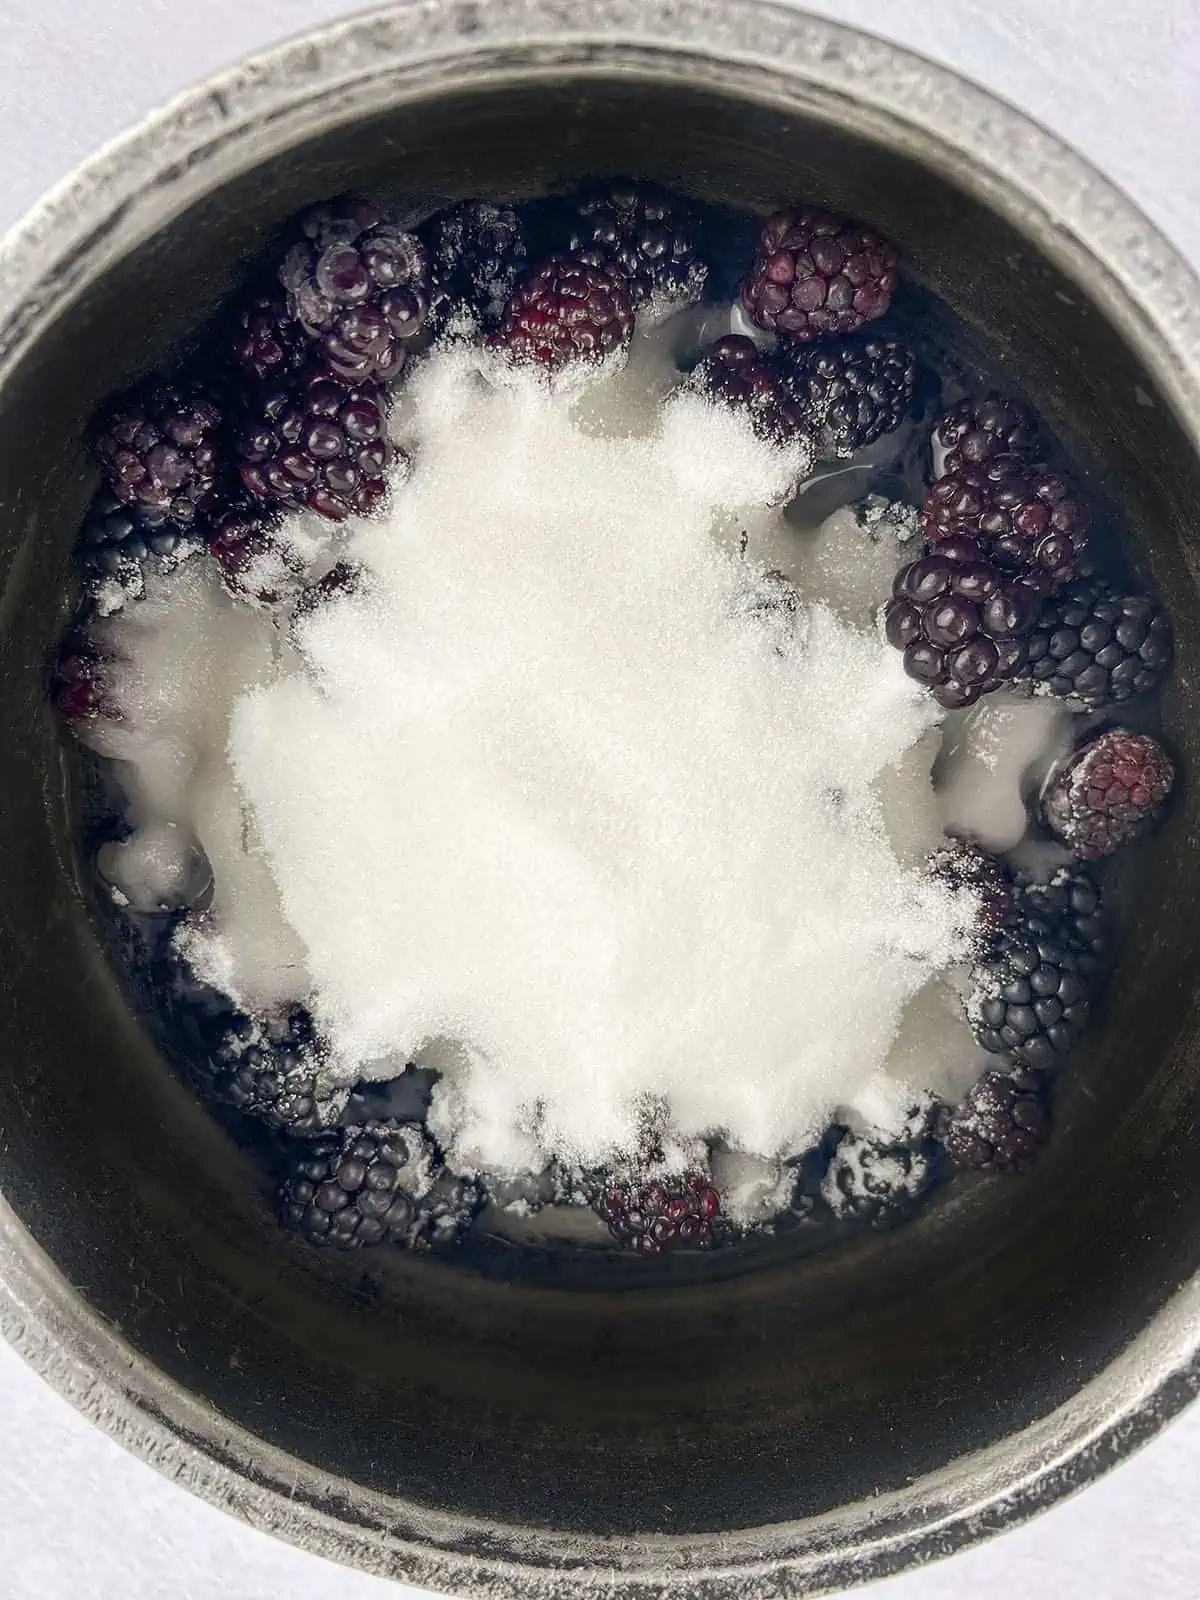 Blackberries, sugar and water in a pot, ready to be boiled.